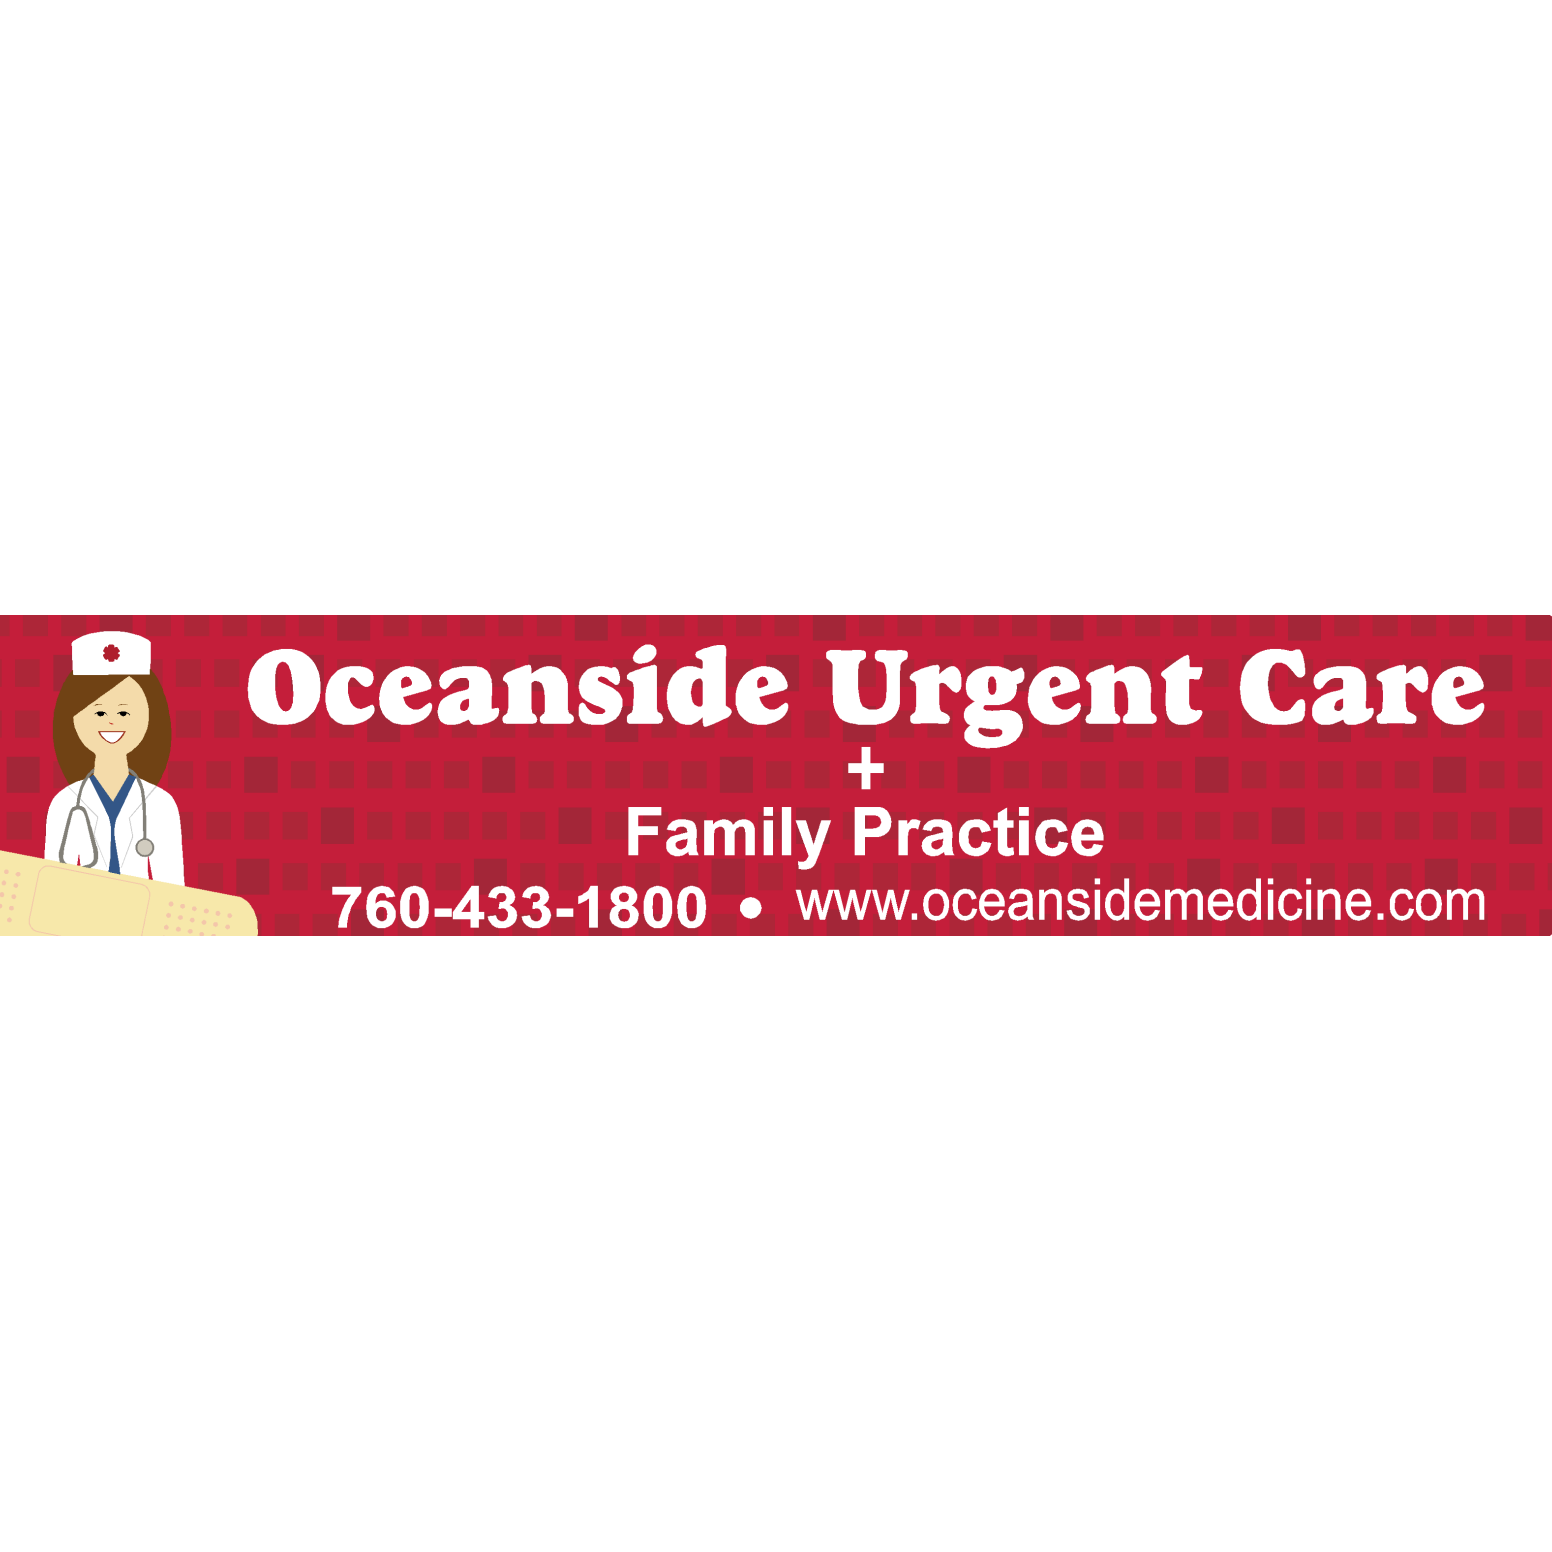 Oceanside Urgent Care and Family Practice Coupons near me ...